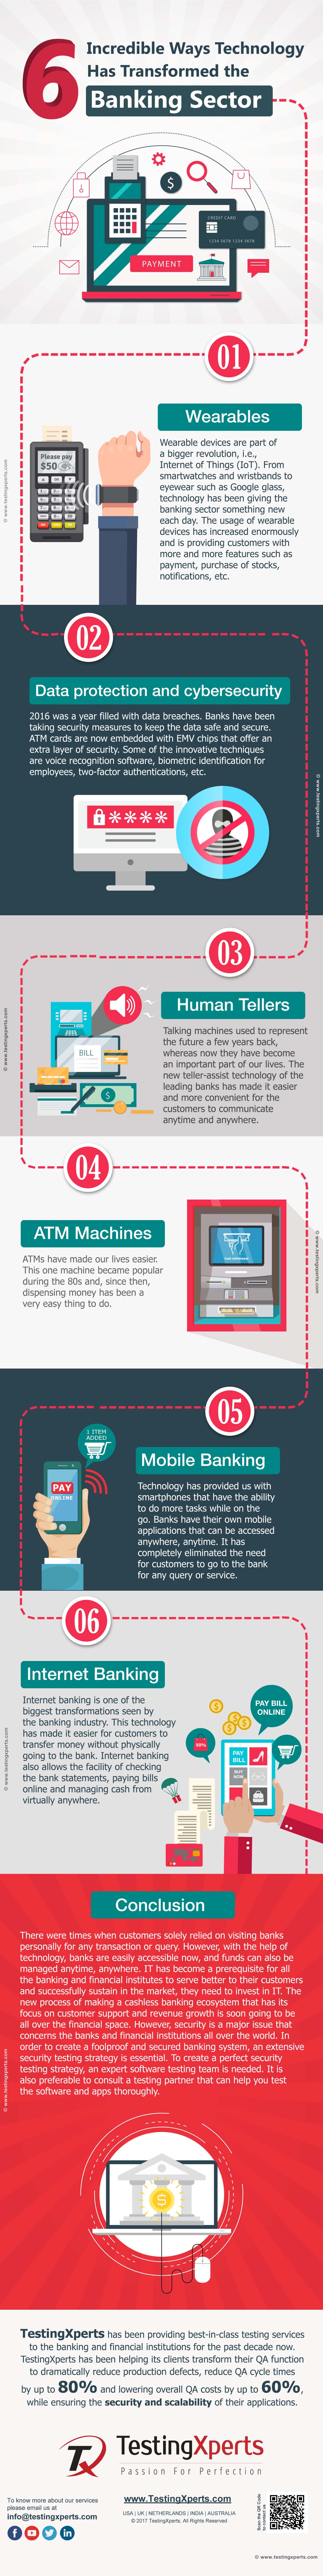 6 Incredible Ways Technology Has Transformed the Banking Sector